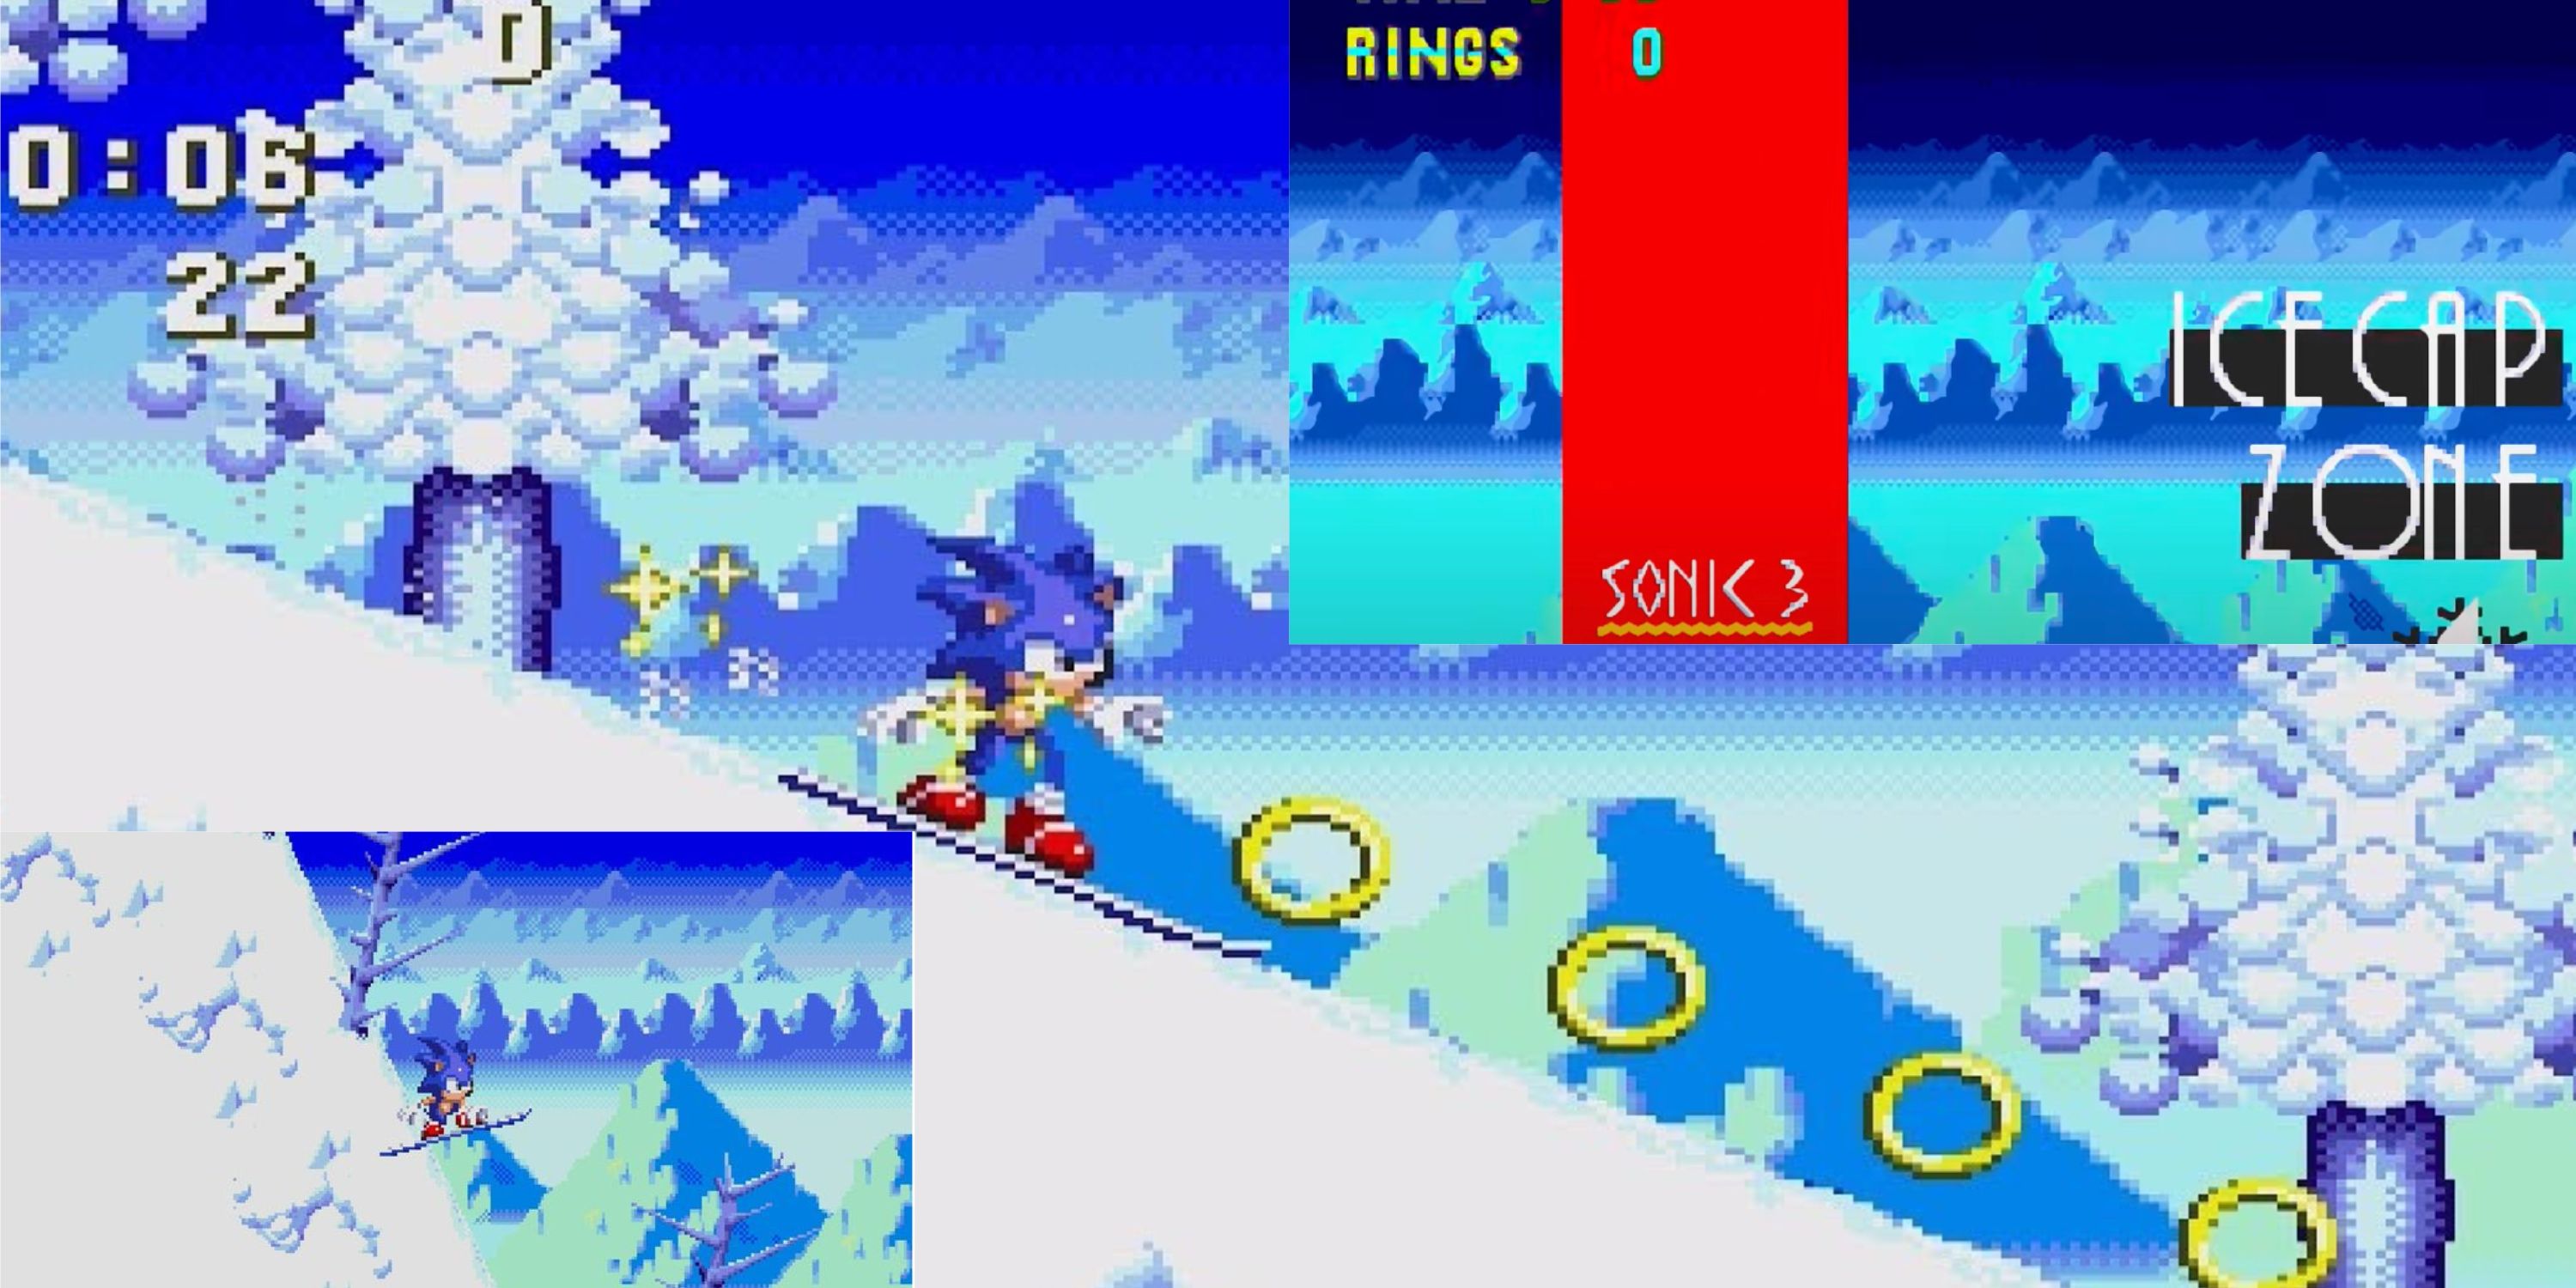 sonic on a snowboard in Ice Cap zone